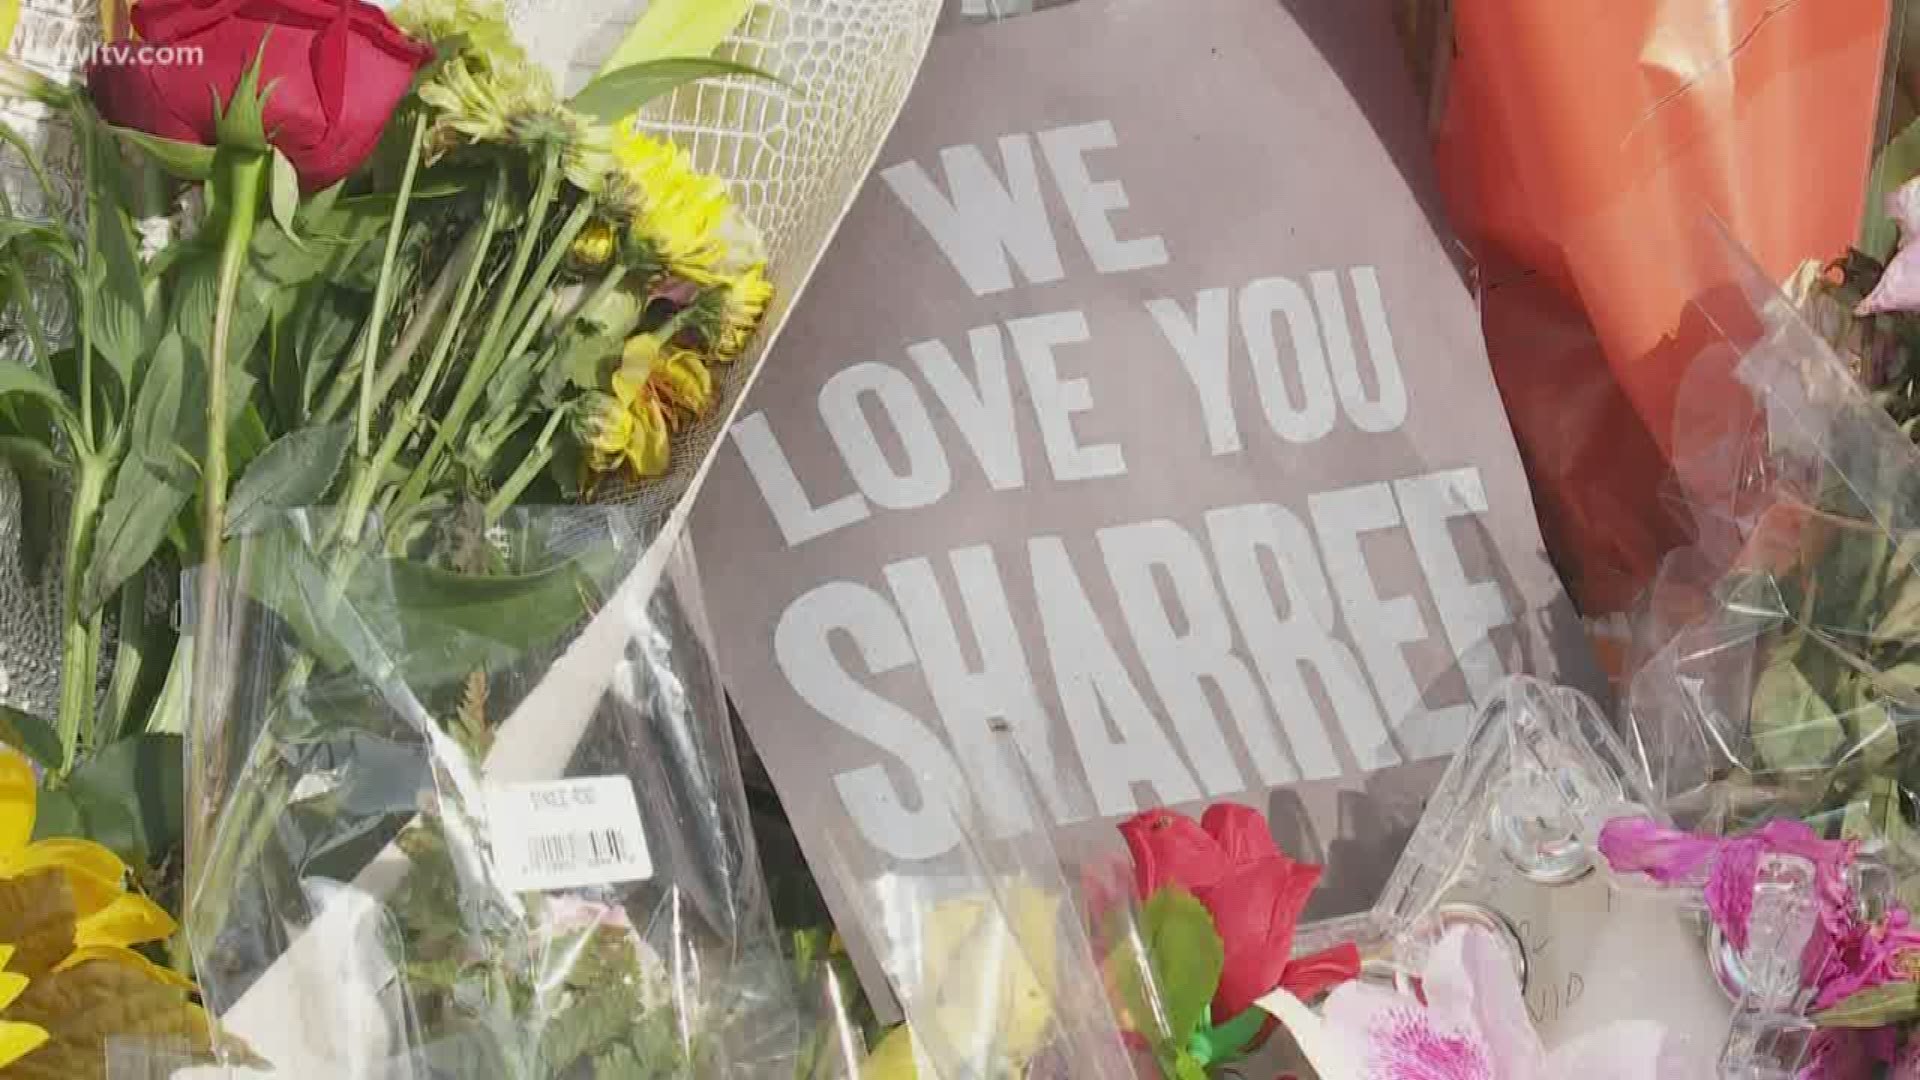 Friends and family were still in disbelief Sunday as they began to pay their respects to Sharree Walls during a visitation at Charbonnet Funeral Home in Treme.